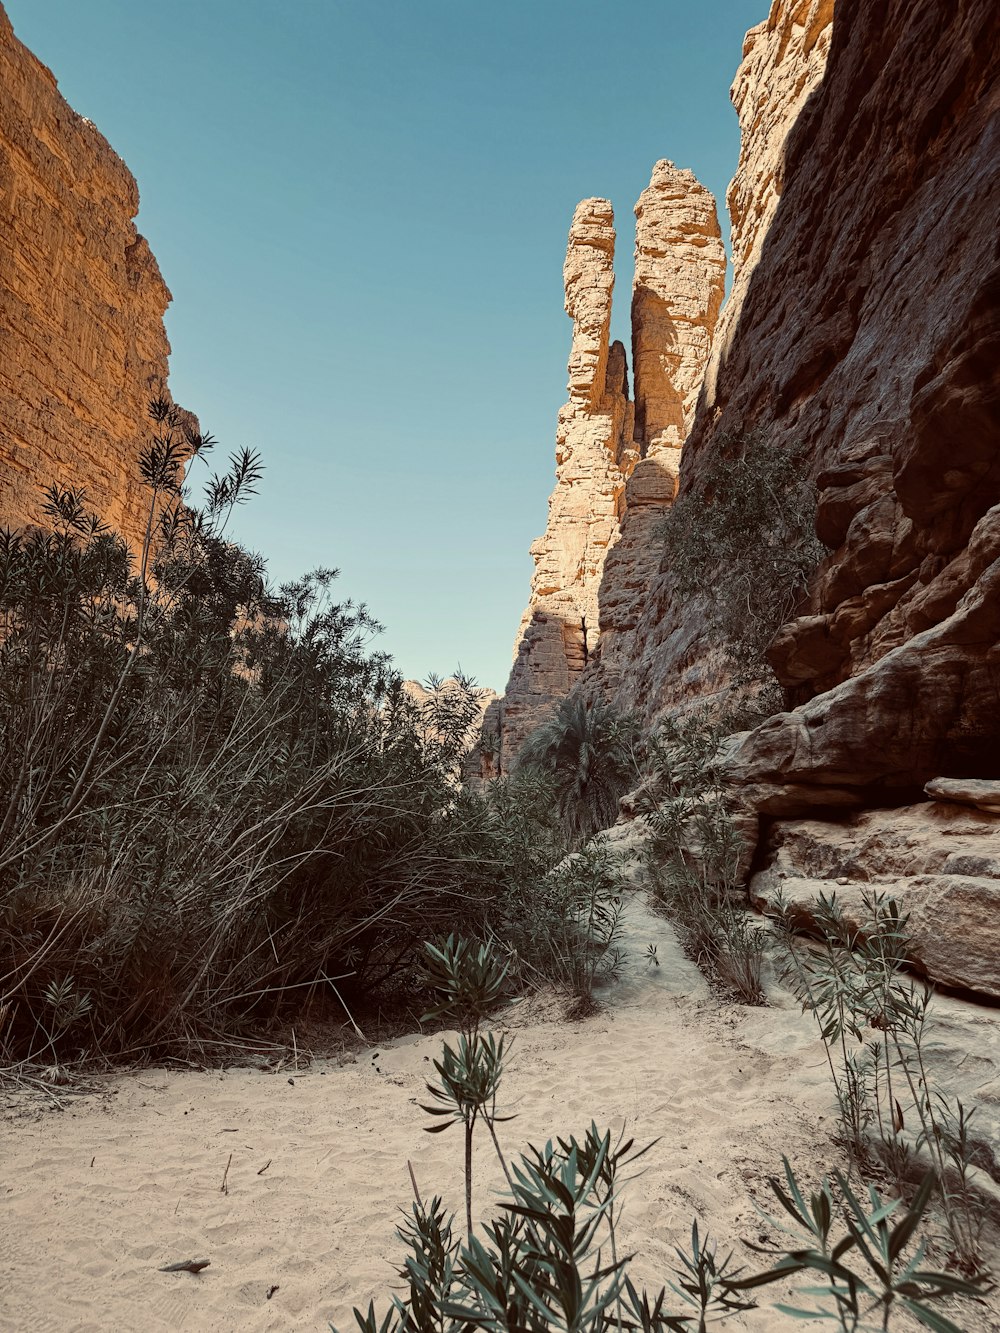 a narrow canyon in the desert with rocks and plants